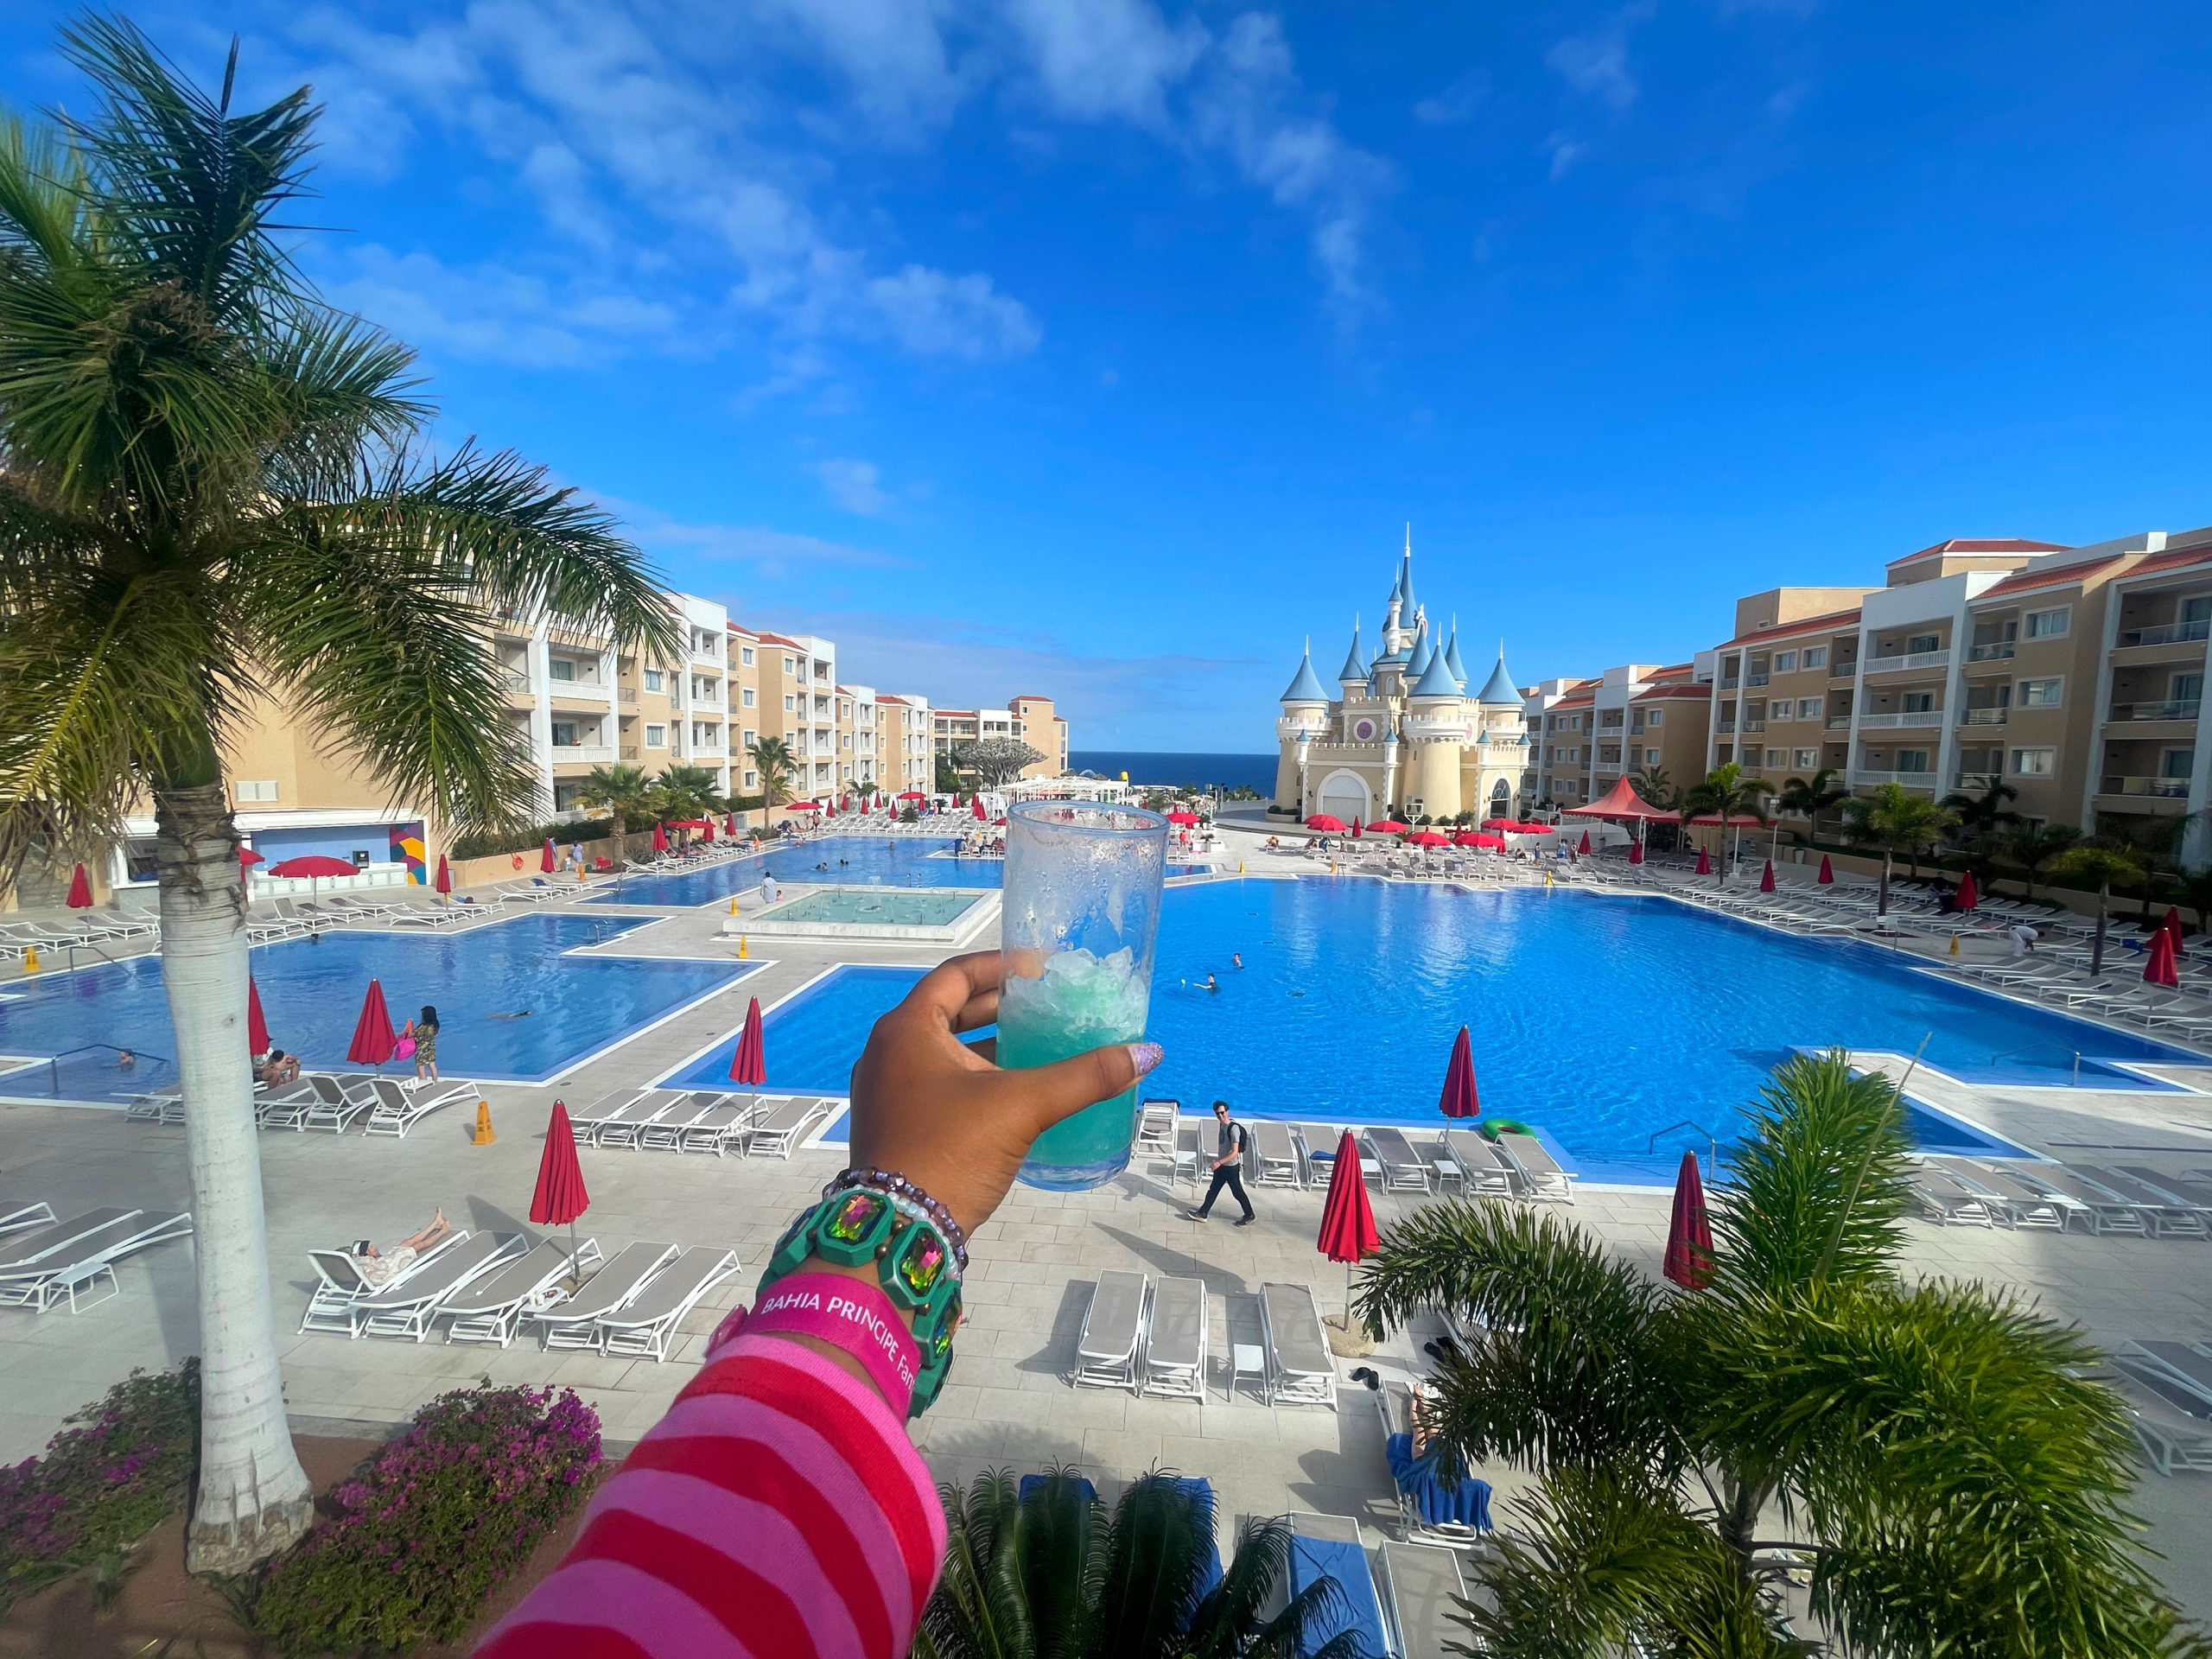 hand holding a cocktail over the view of the bahia principe fanastia tenerife colourful hotel - you can see the pool and castle in view